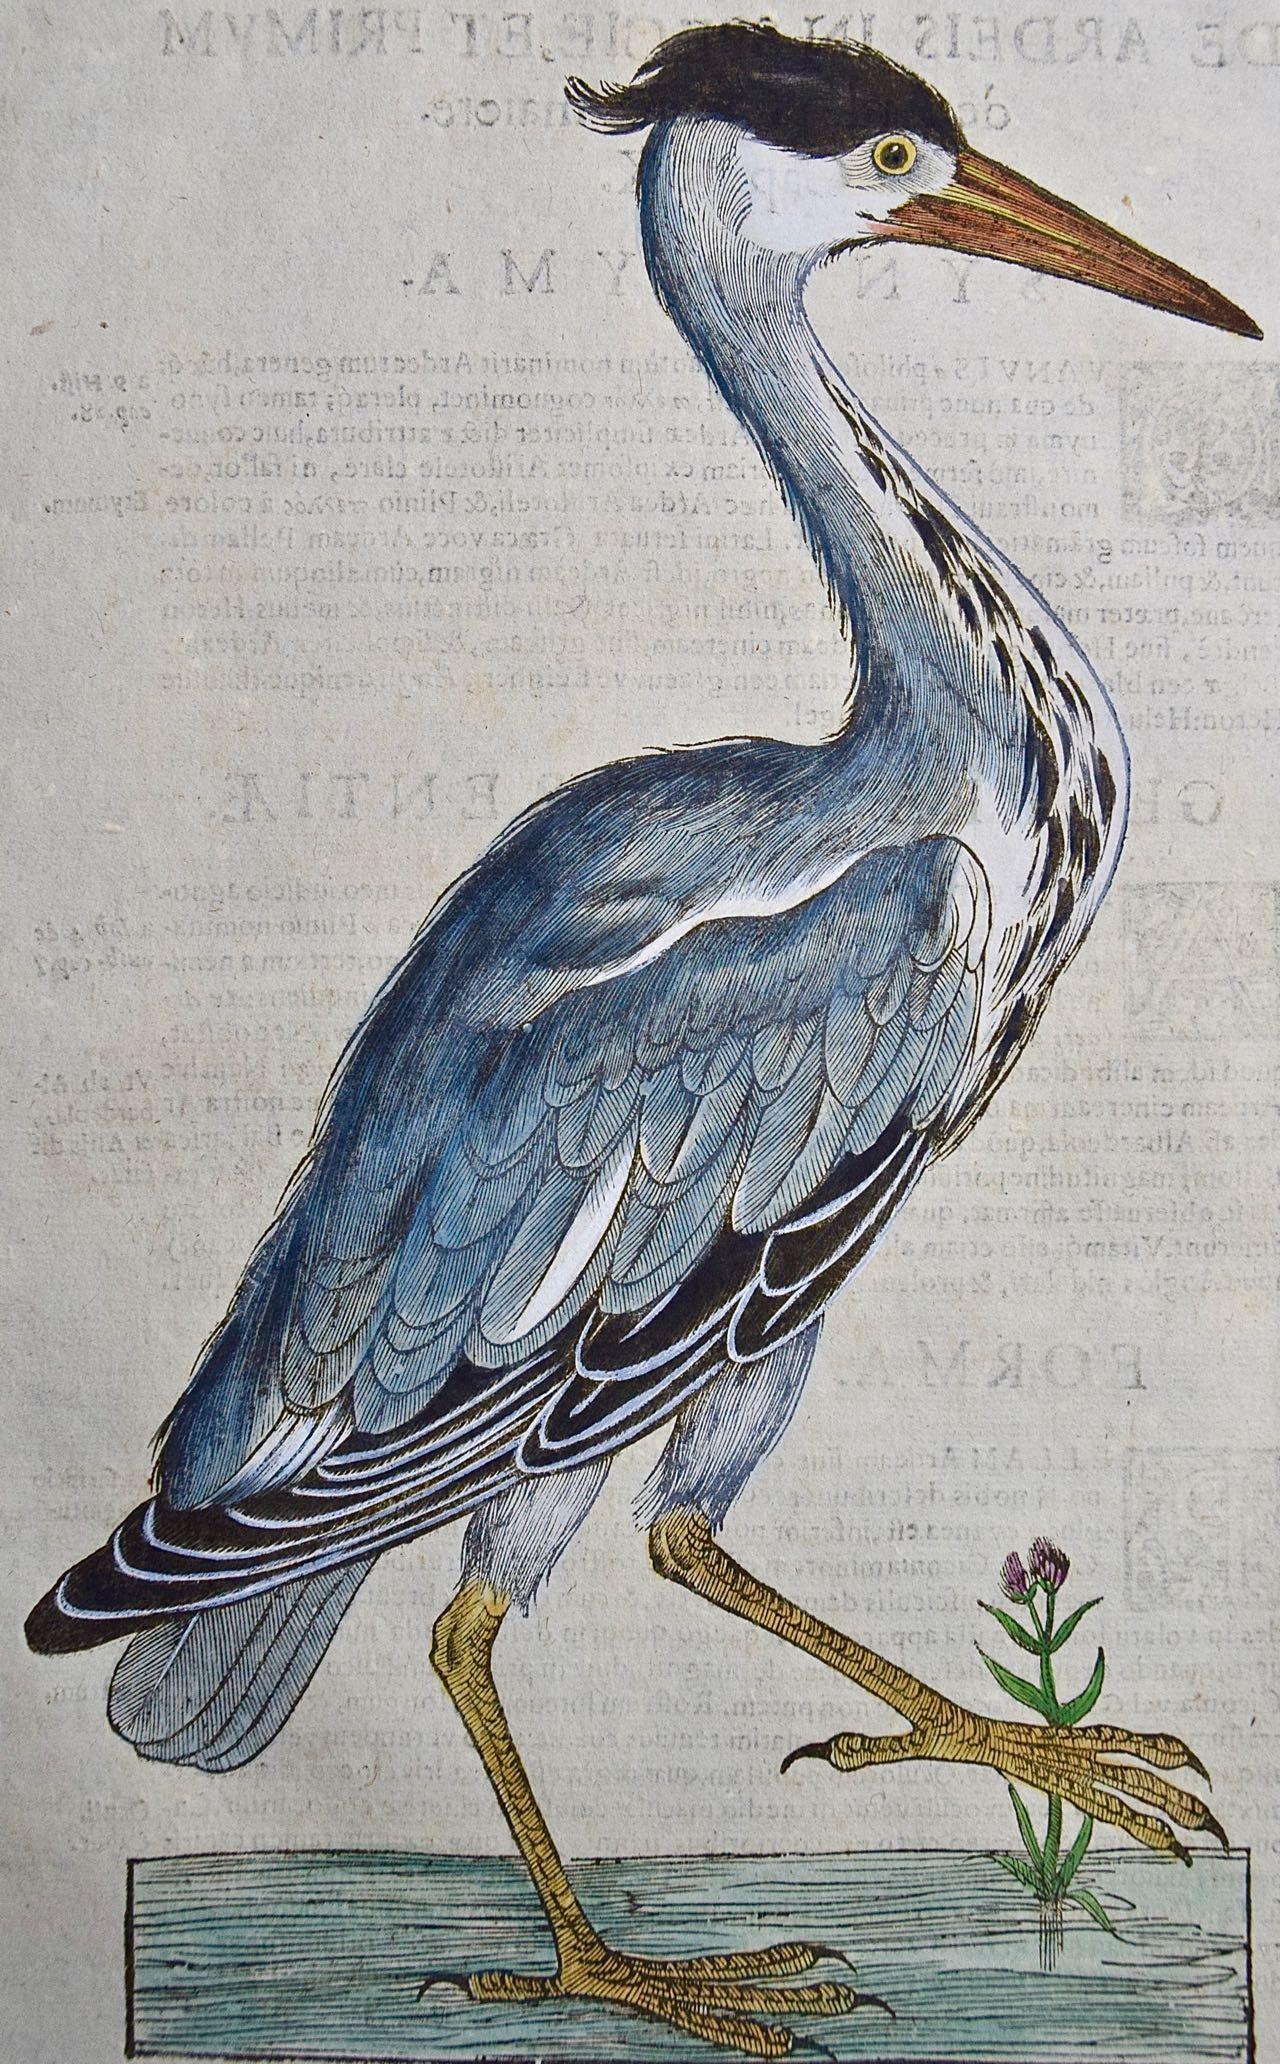 A 16th/17th Century Hand-colored Engraving of a Grey Heron Bird by Aldrovandi - Print by Ulisse Aldrovandi